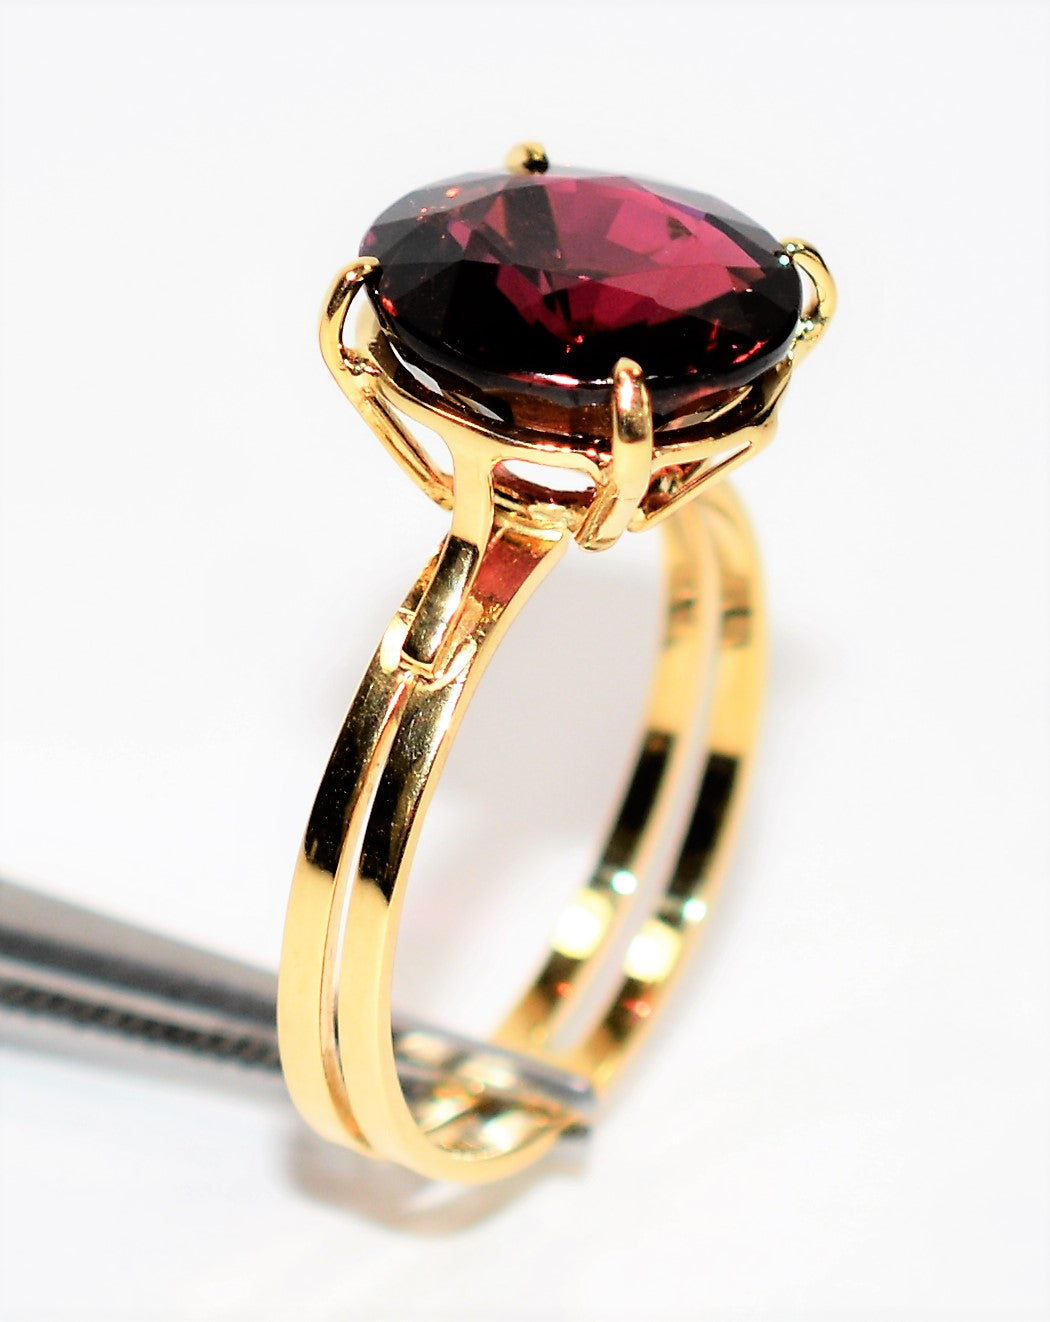 Natural Rubellite Ring 18K Solid Gold 4.48ct Pink Tourmaline Ring Solitaire Ring Women's Ring Statement Ring Estate Jewelry Cocktail Ring